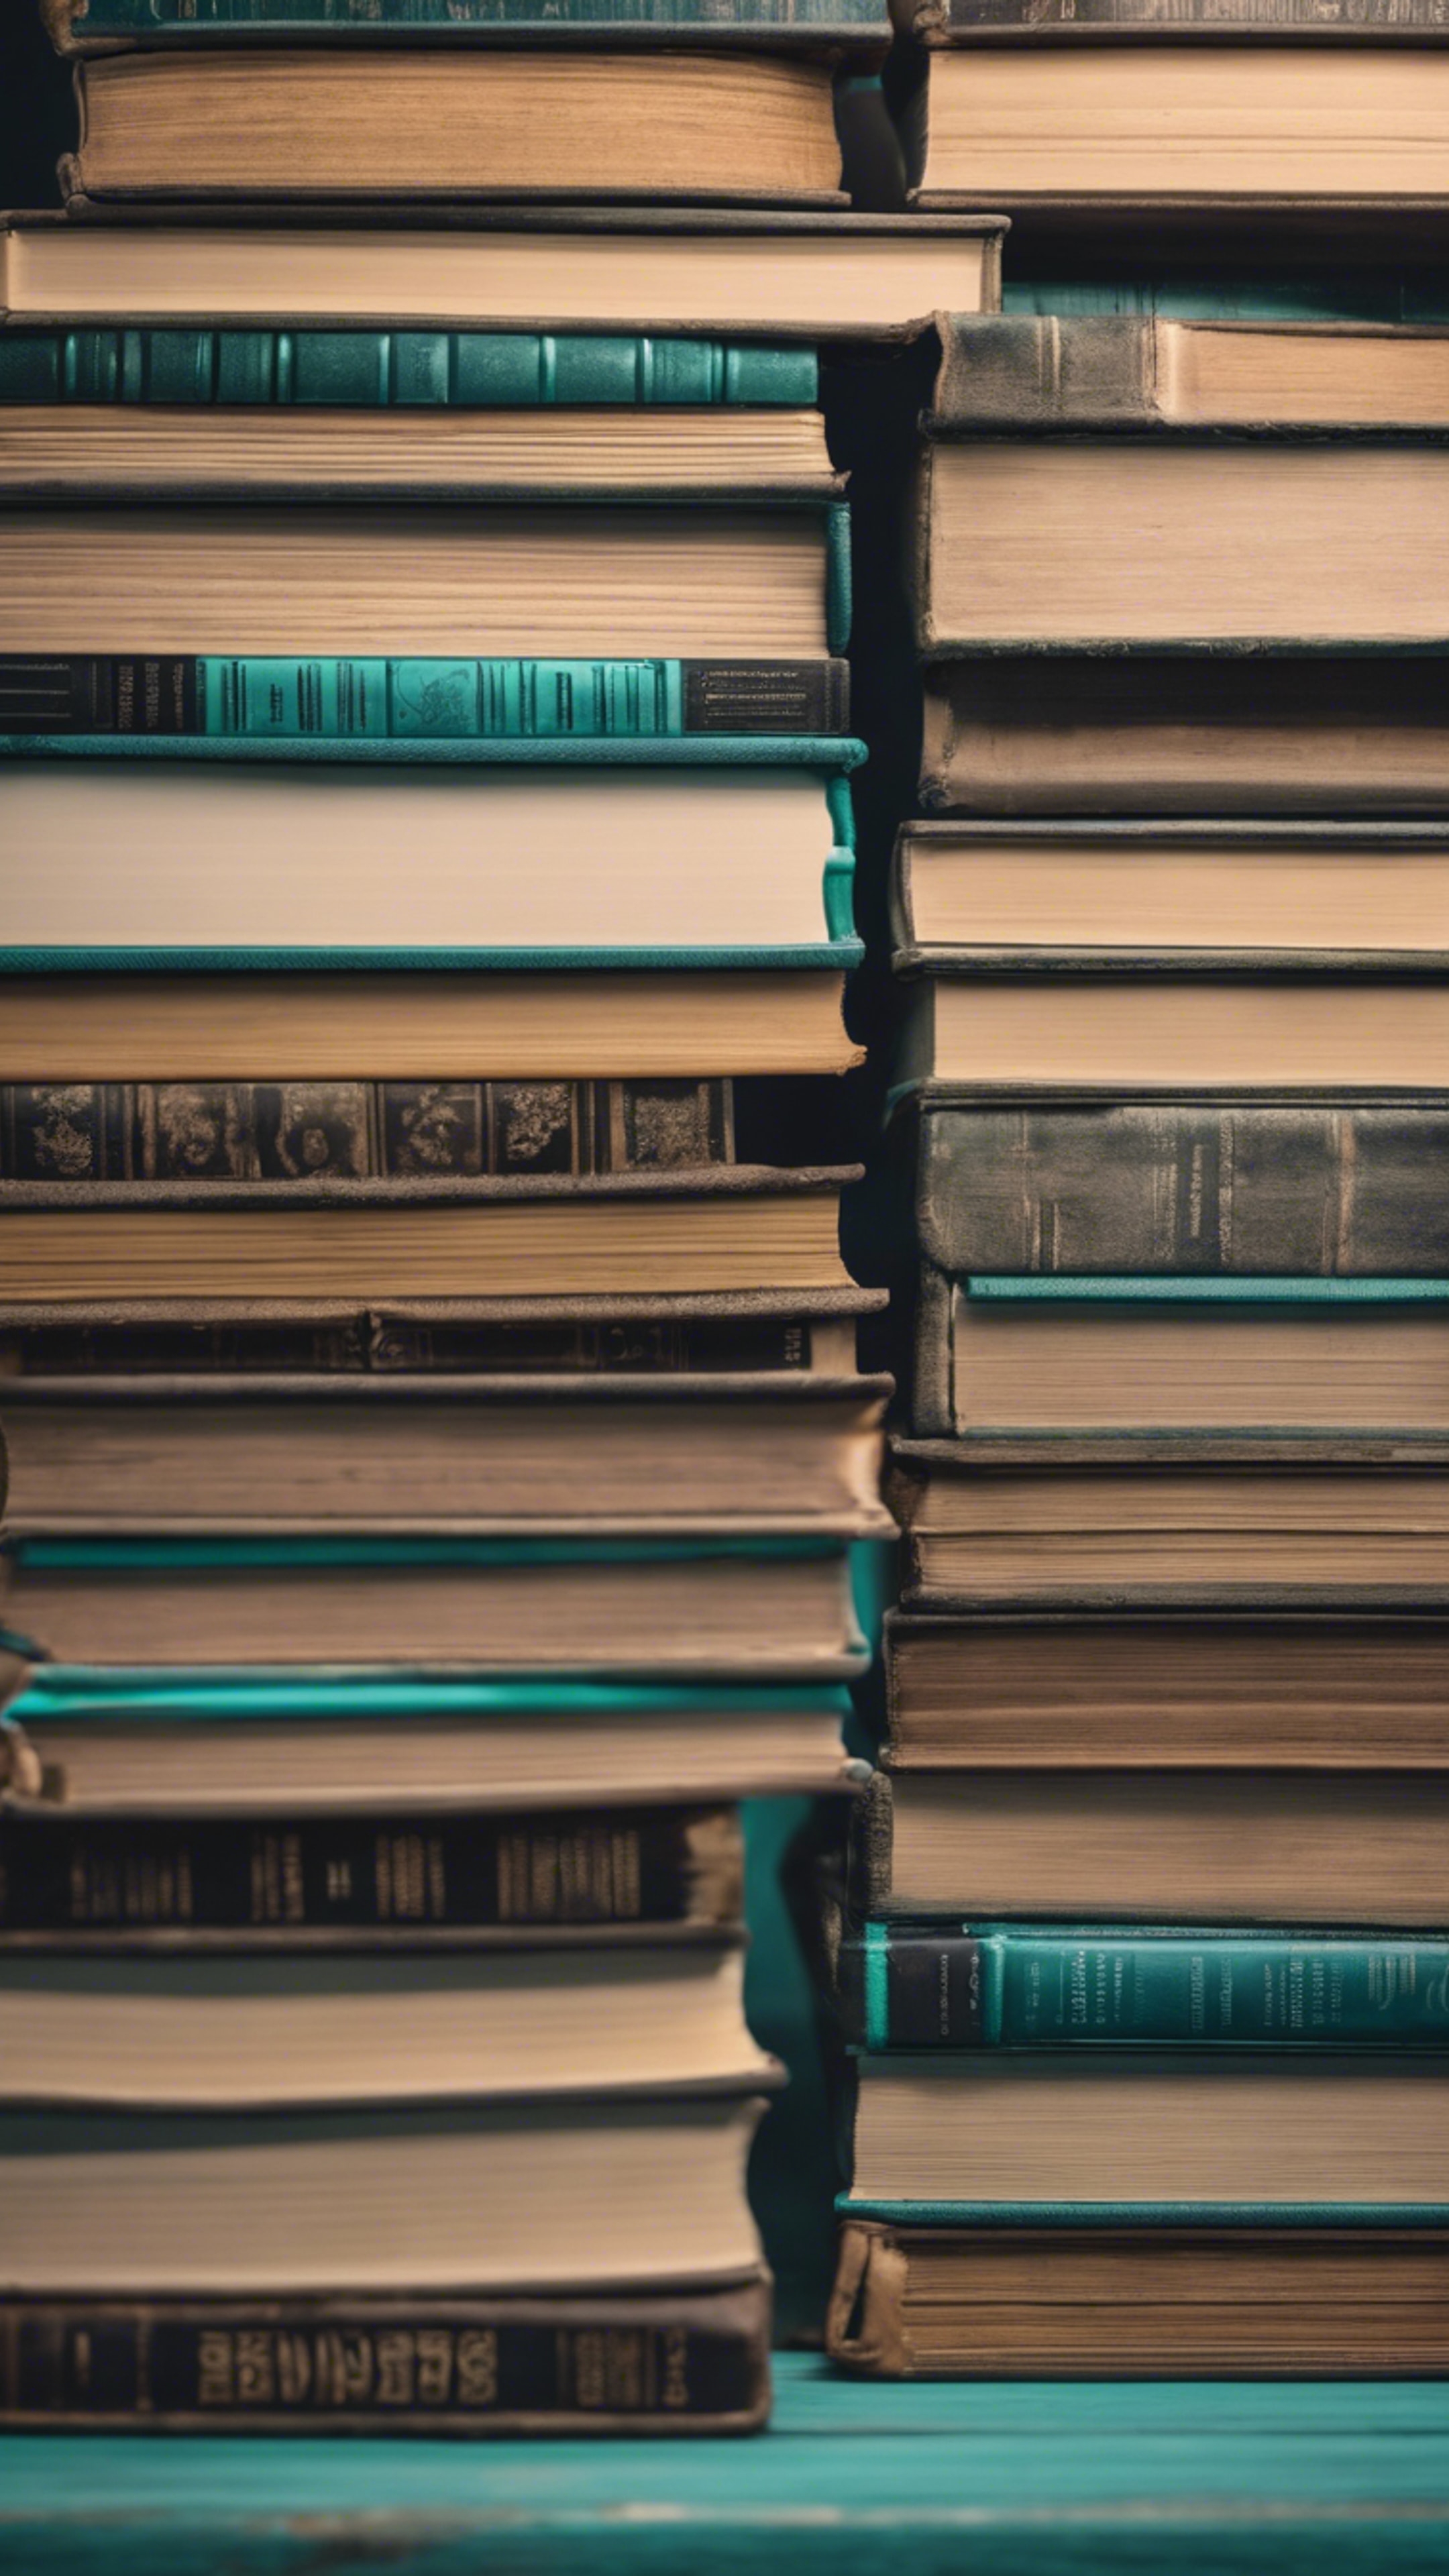 A stack of hardcover books with cool teal book jackets on a wooden table. Wallpaper[bfe0116fe49a422a95e4]